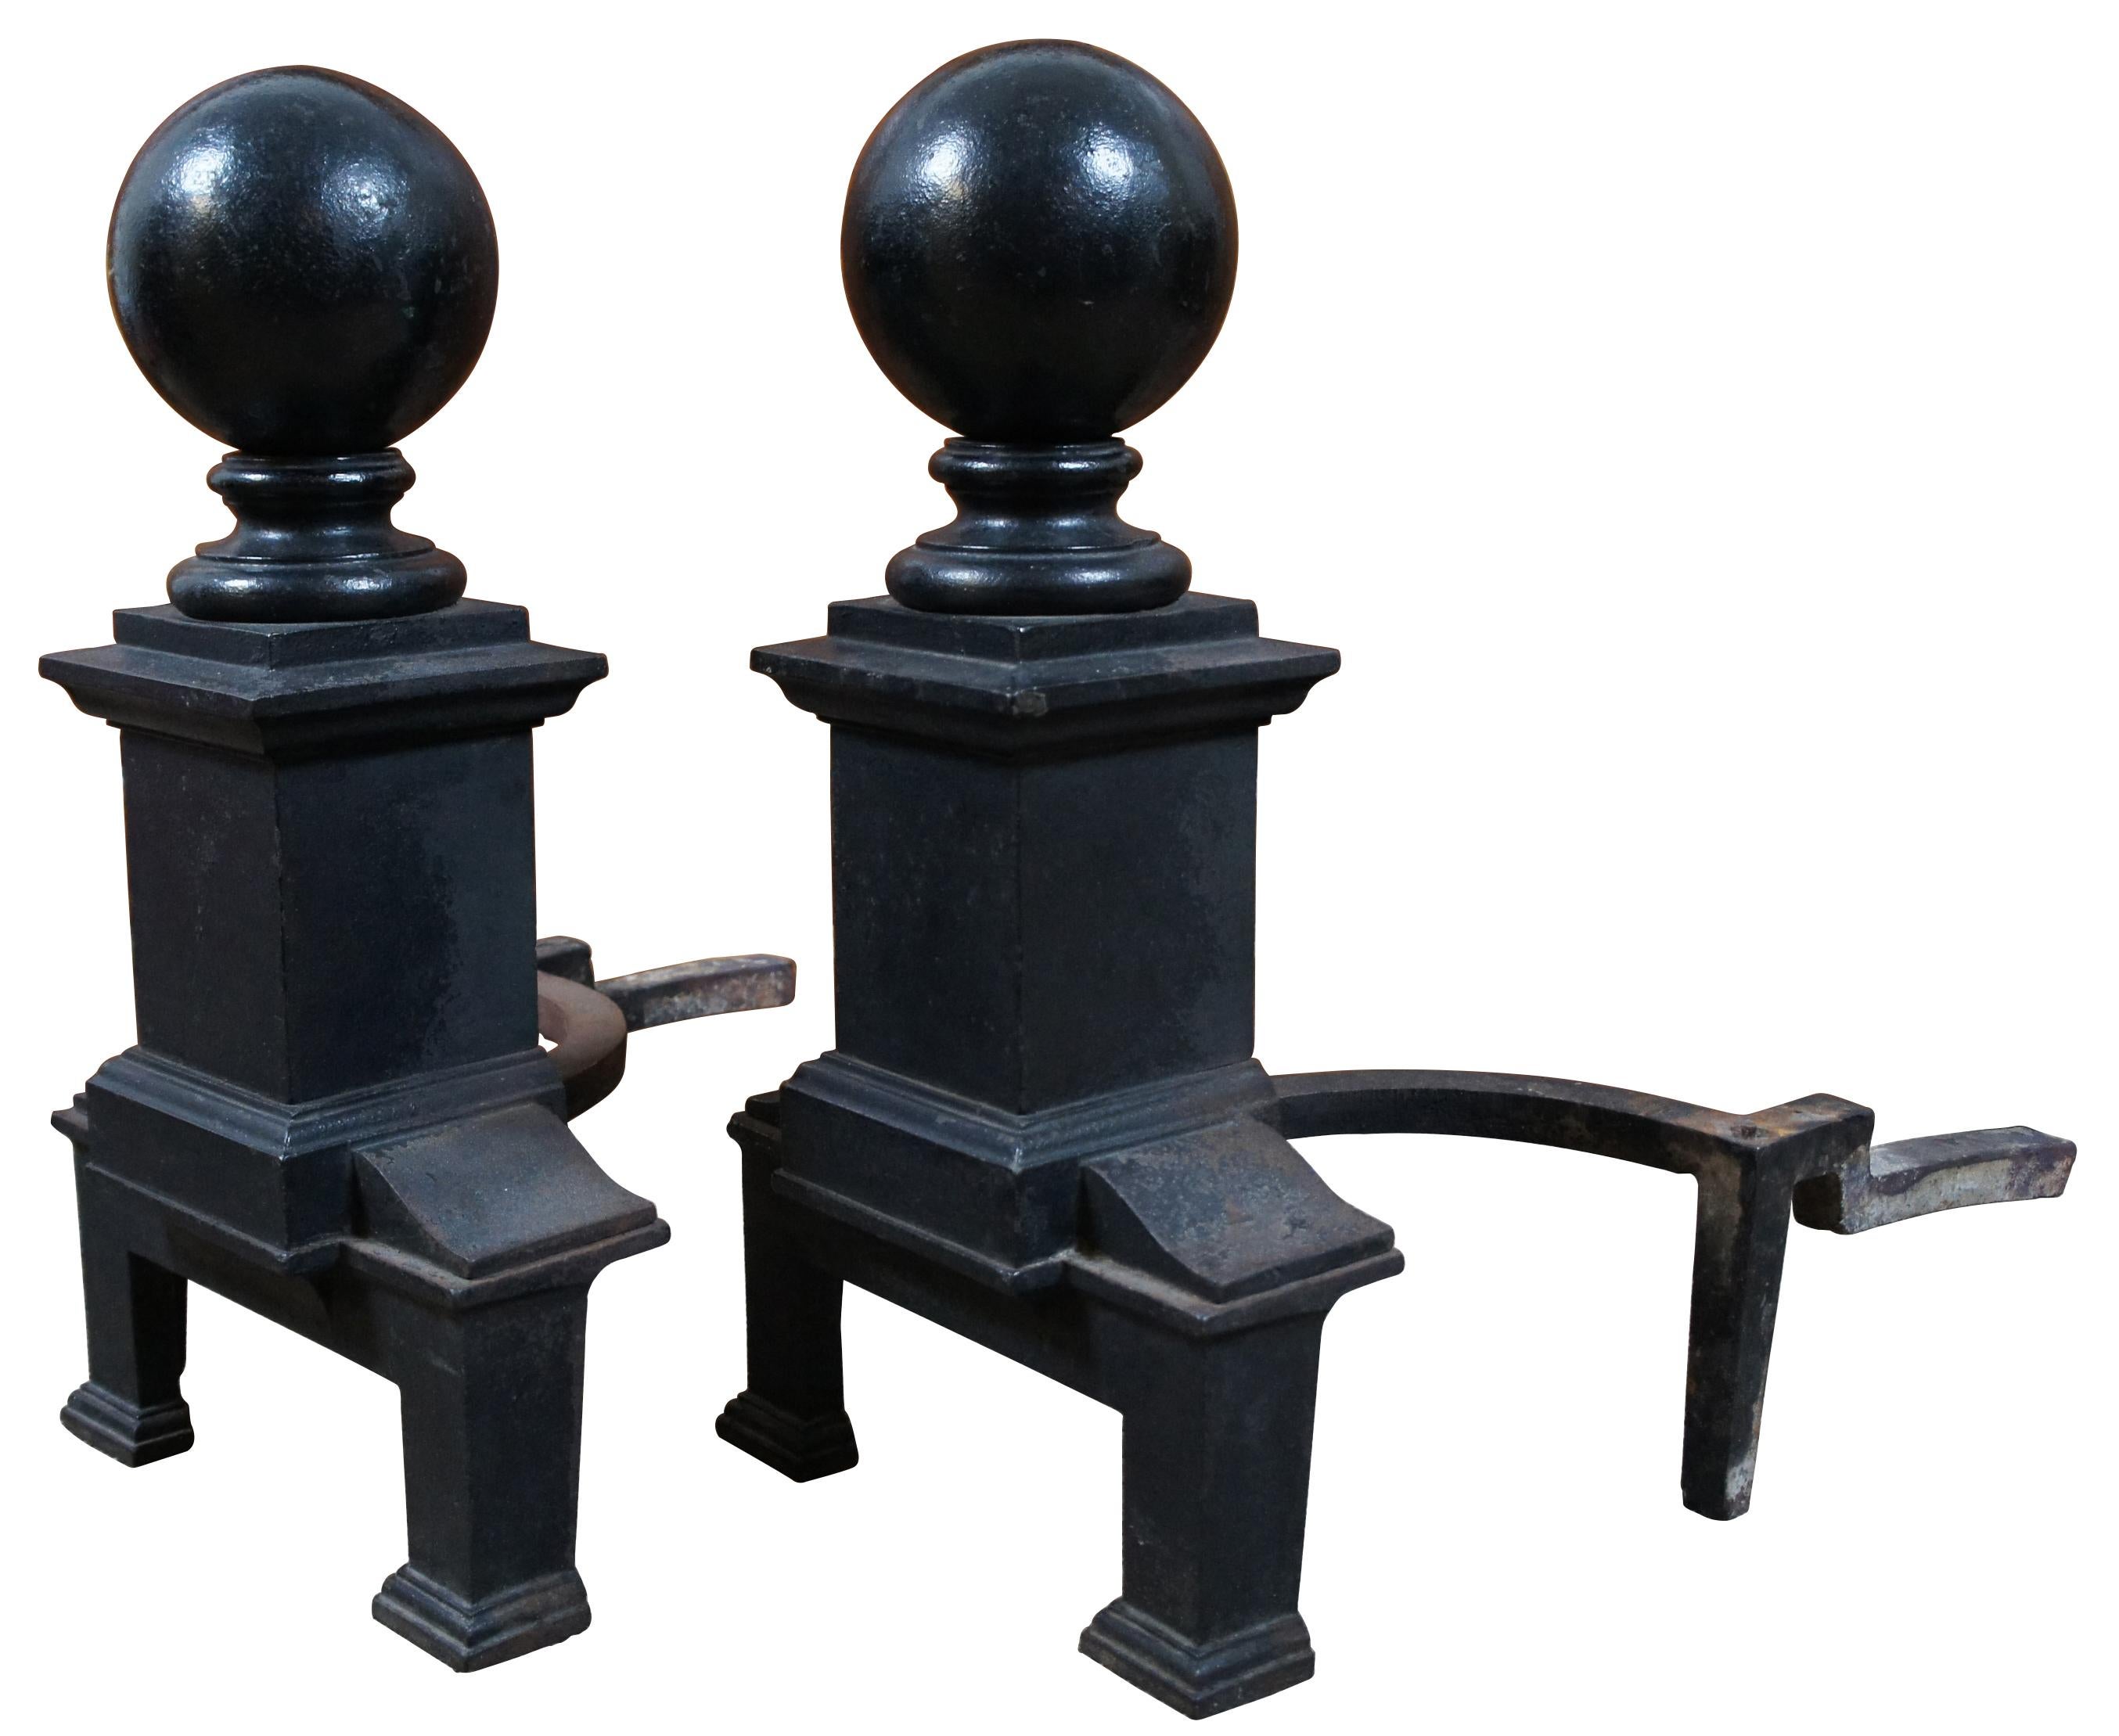 Antique black cast iron fireplace andirons with cannon ball tops and broad square column bases. Casting mark of 1962 on underside. An exceptional and heavy set. Measure: 20